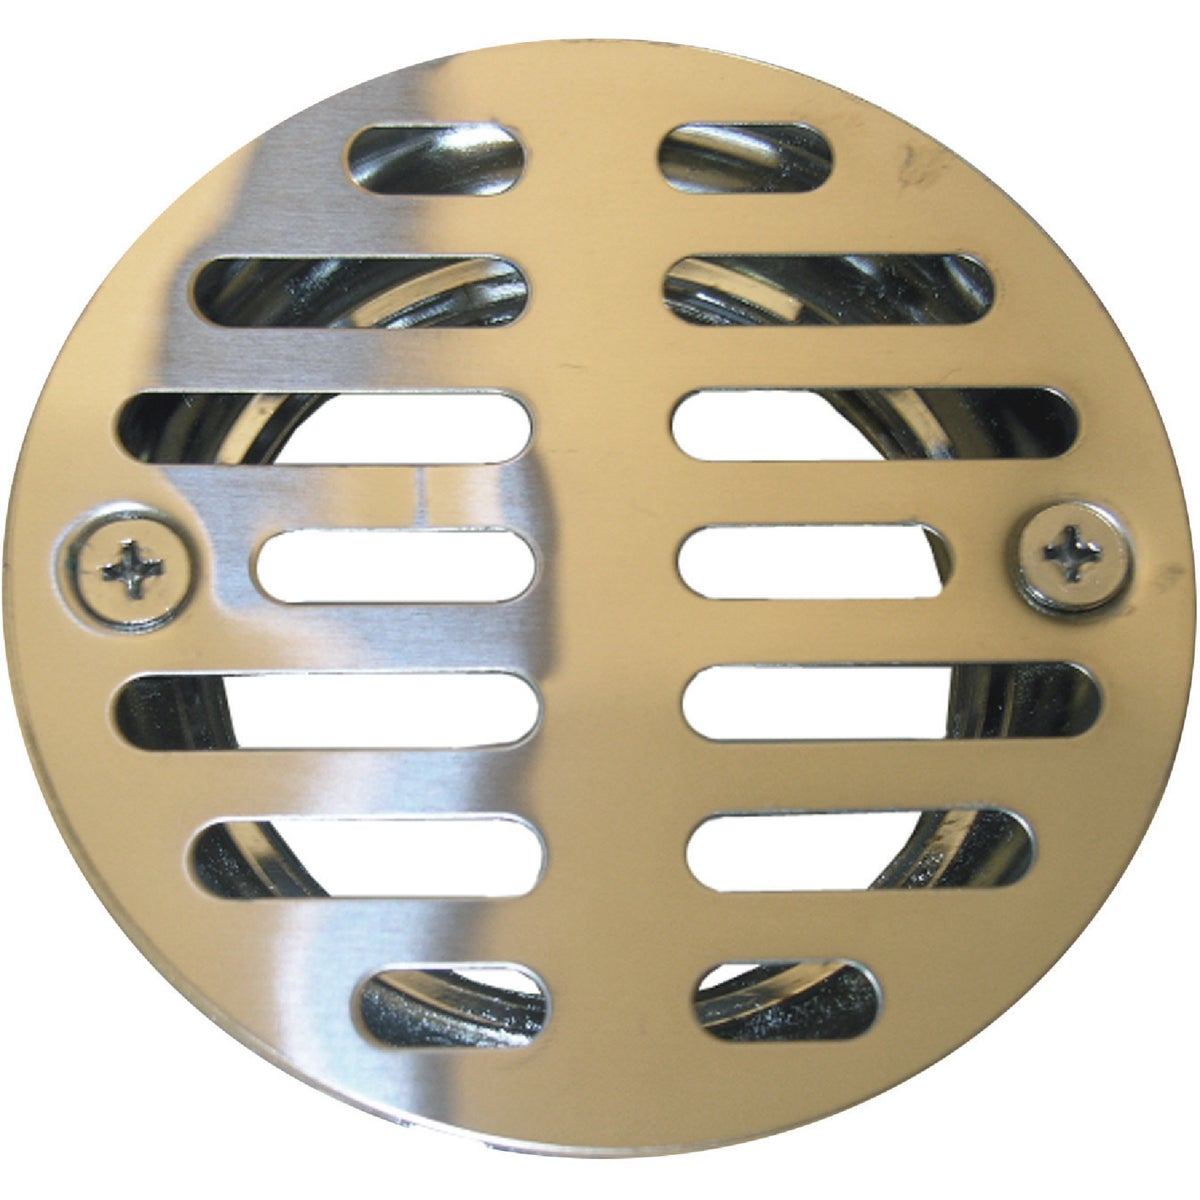 Lasco 3-1/2 In. Chrome Plated Shower Drain Strainer for Tile Installations, 1-1/2 In. FPT Outlet